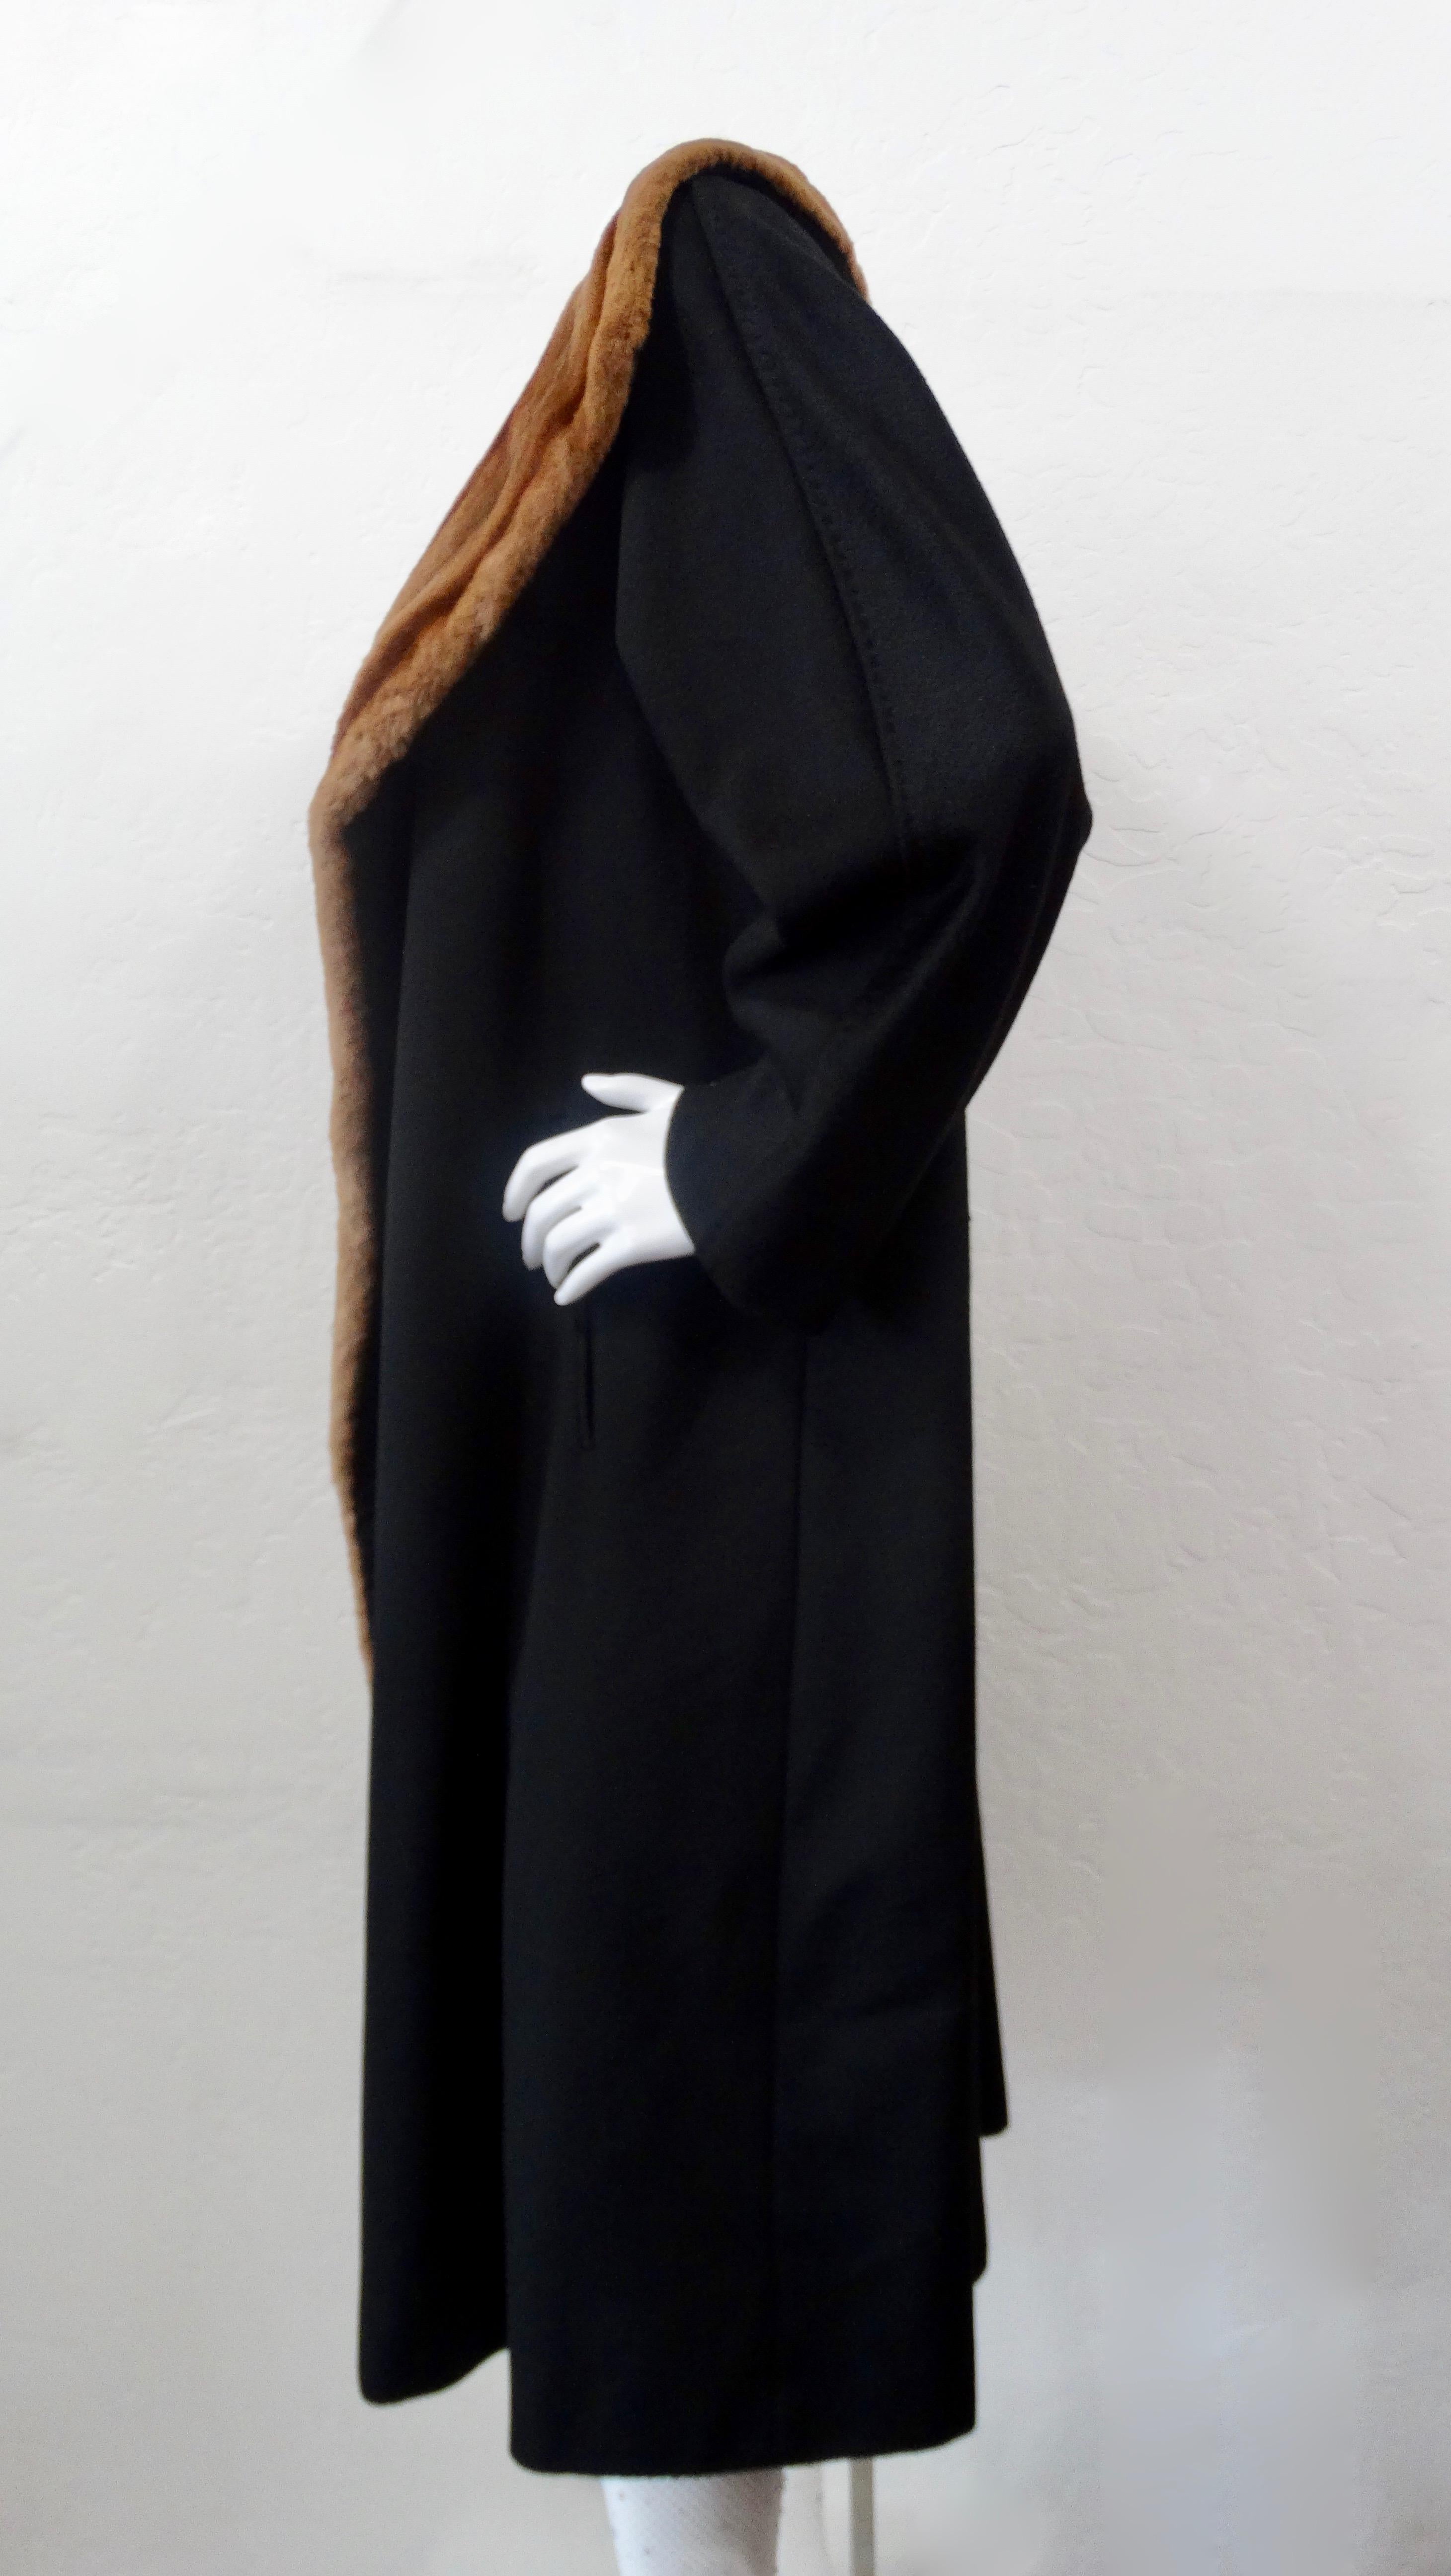 Stay warm and Oh-so stylish with this MaxMara coat! Circa late 20th century, this coat is crafted from black cashmere and features a soft mink fur shawl collar. Includes side slit pockets and a button for a cape look. Chic and timeless, this coat is